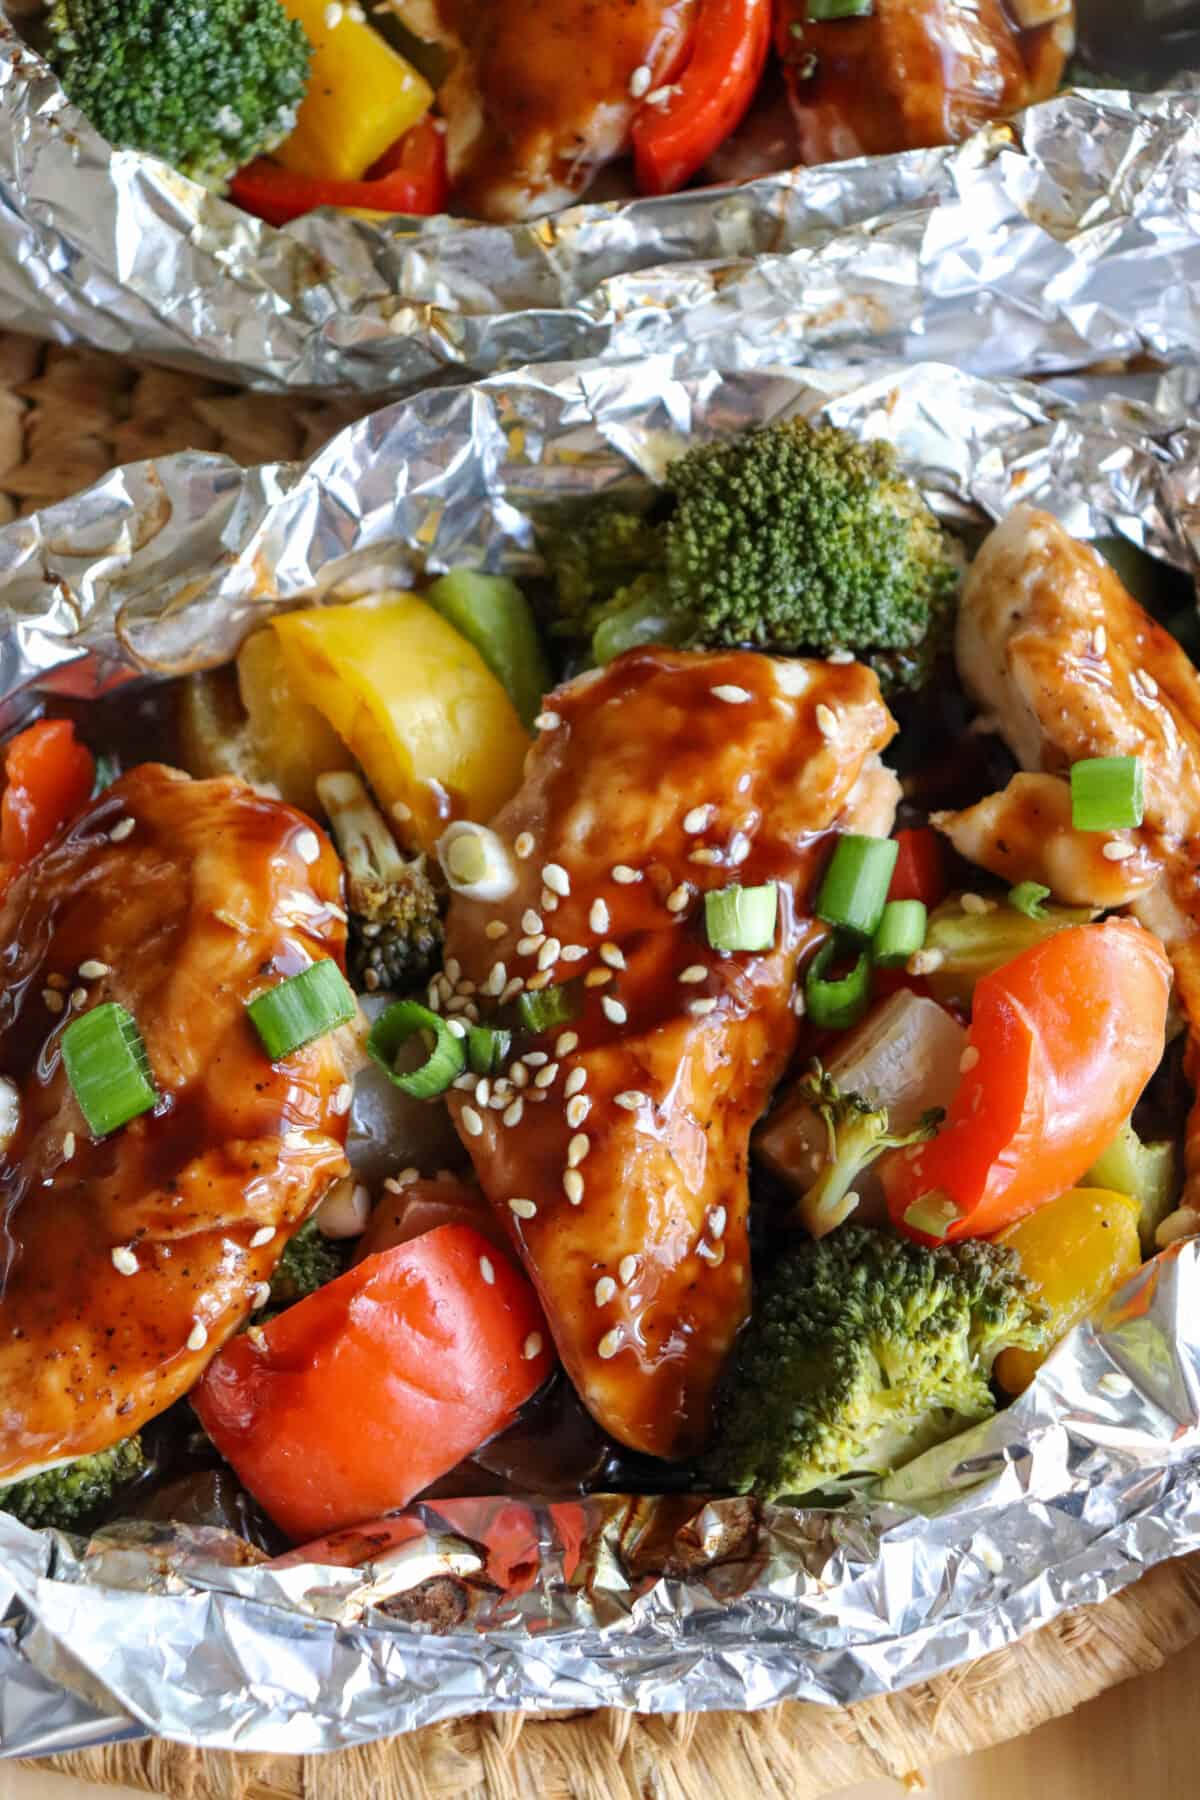 Chicken and vegetables covered in teriyaki sauce in a foil packet.